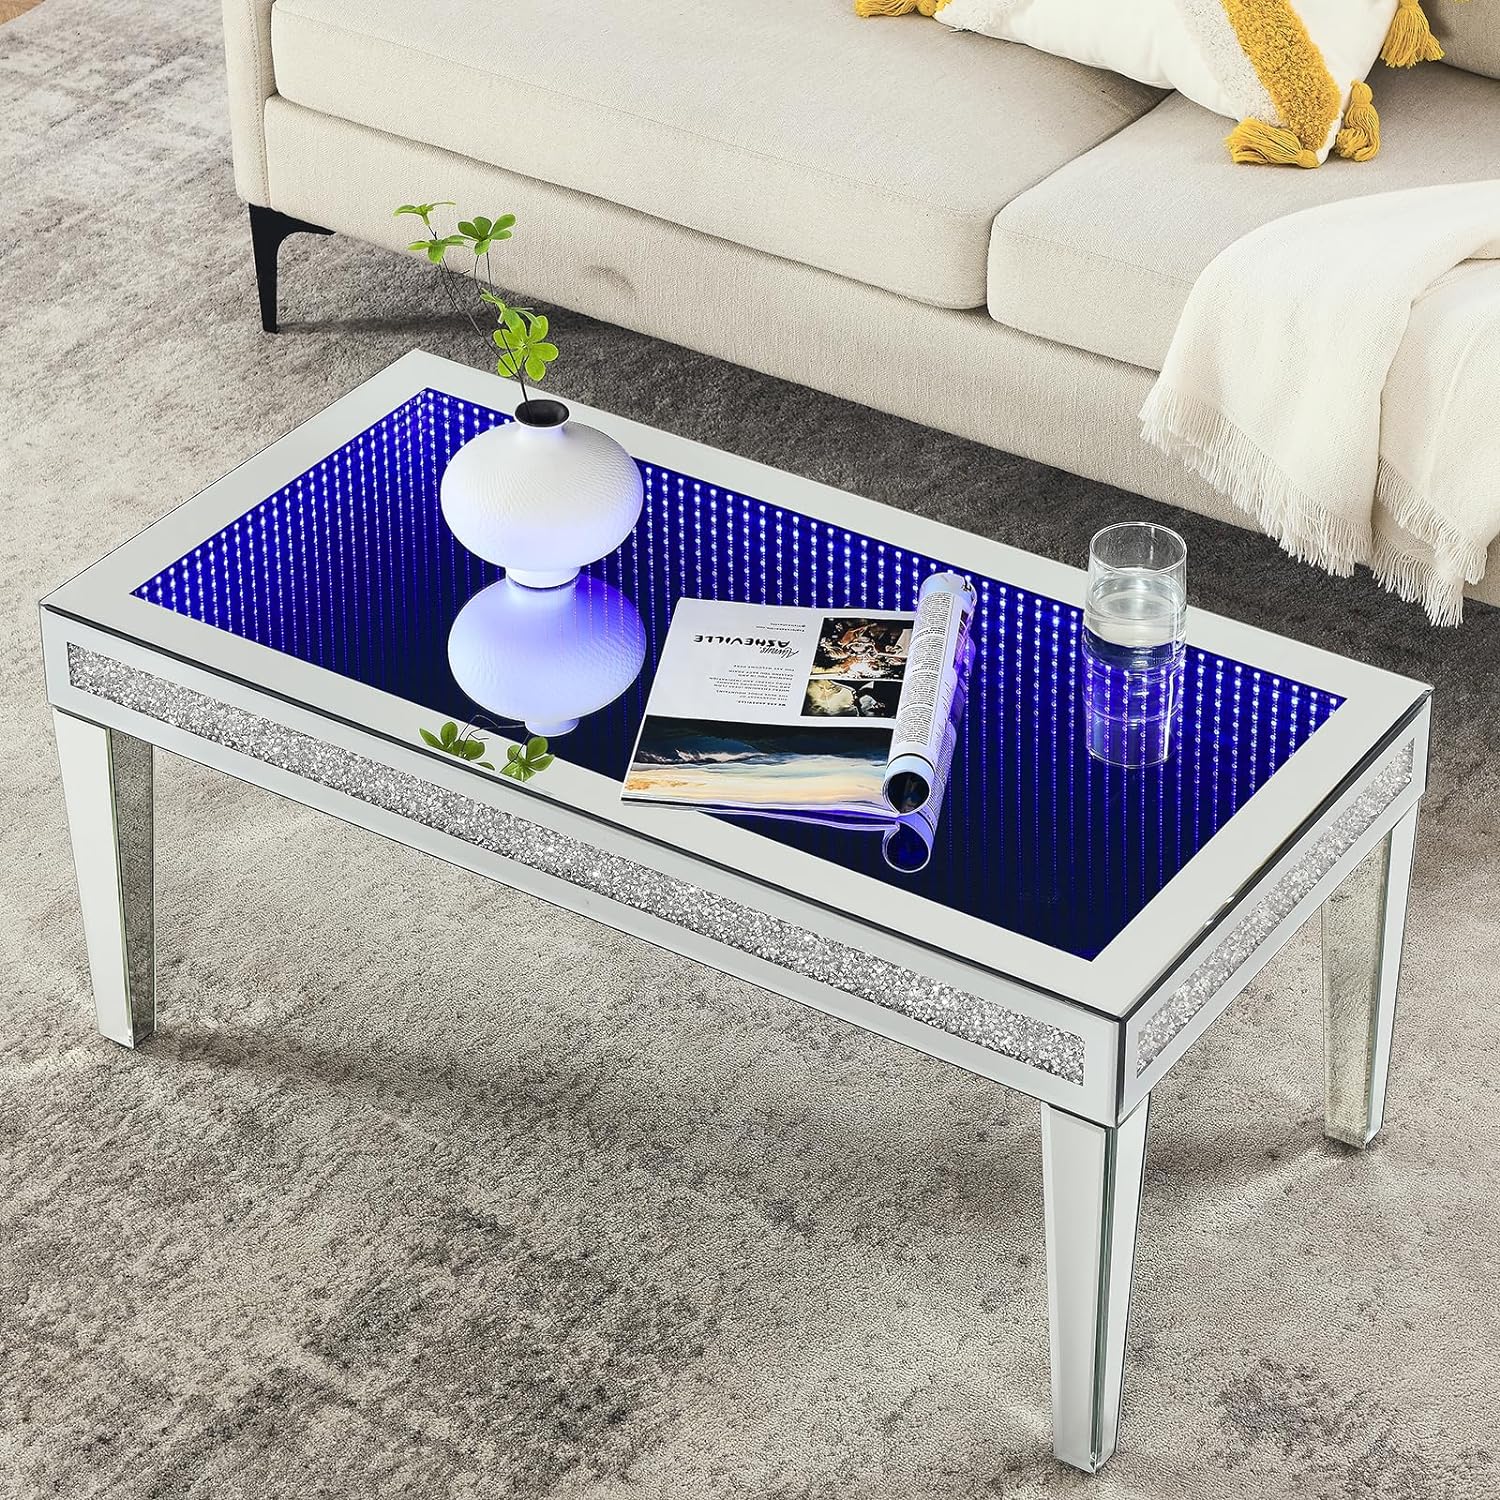 IKIFLY Mirrored Coffee Table with LED Lasagna Lights, Glass Rectangle Coffee Tea Table with Crushed Diamond for Living Room Bedroom